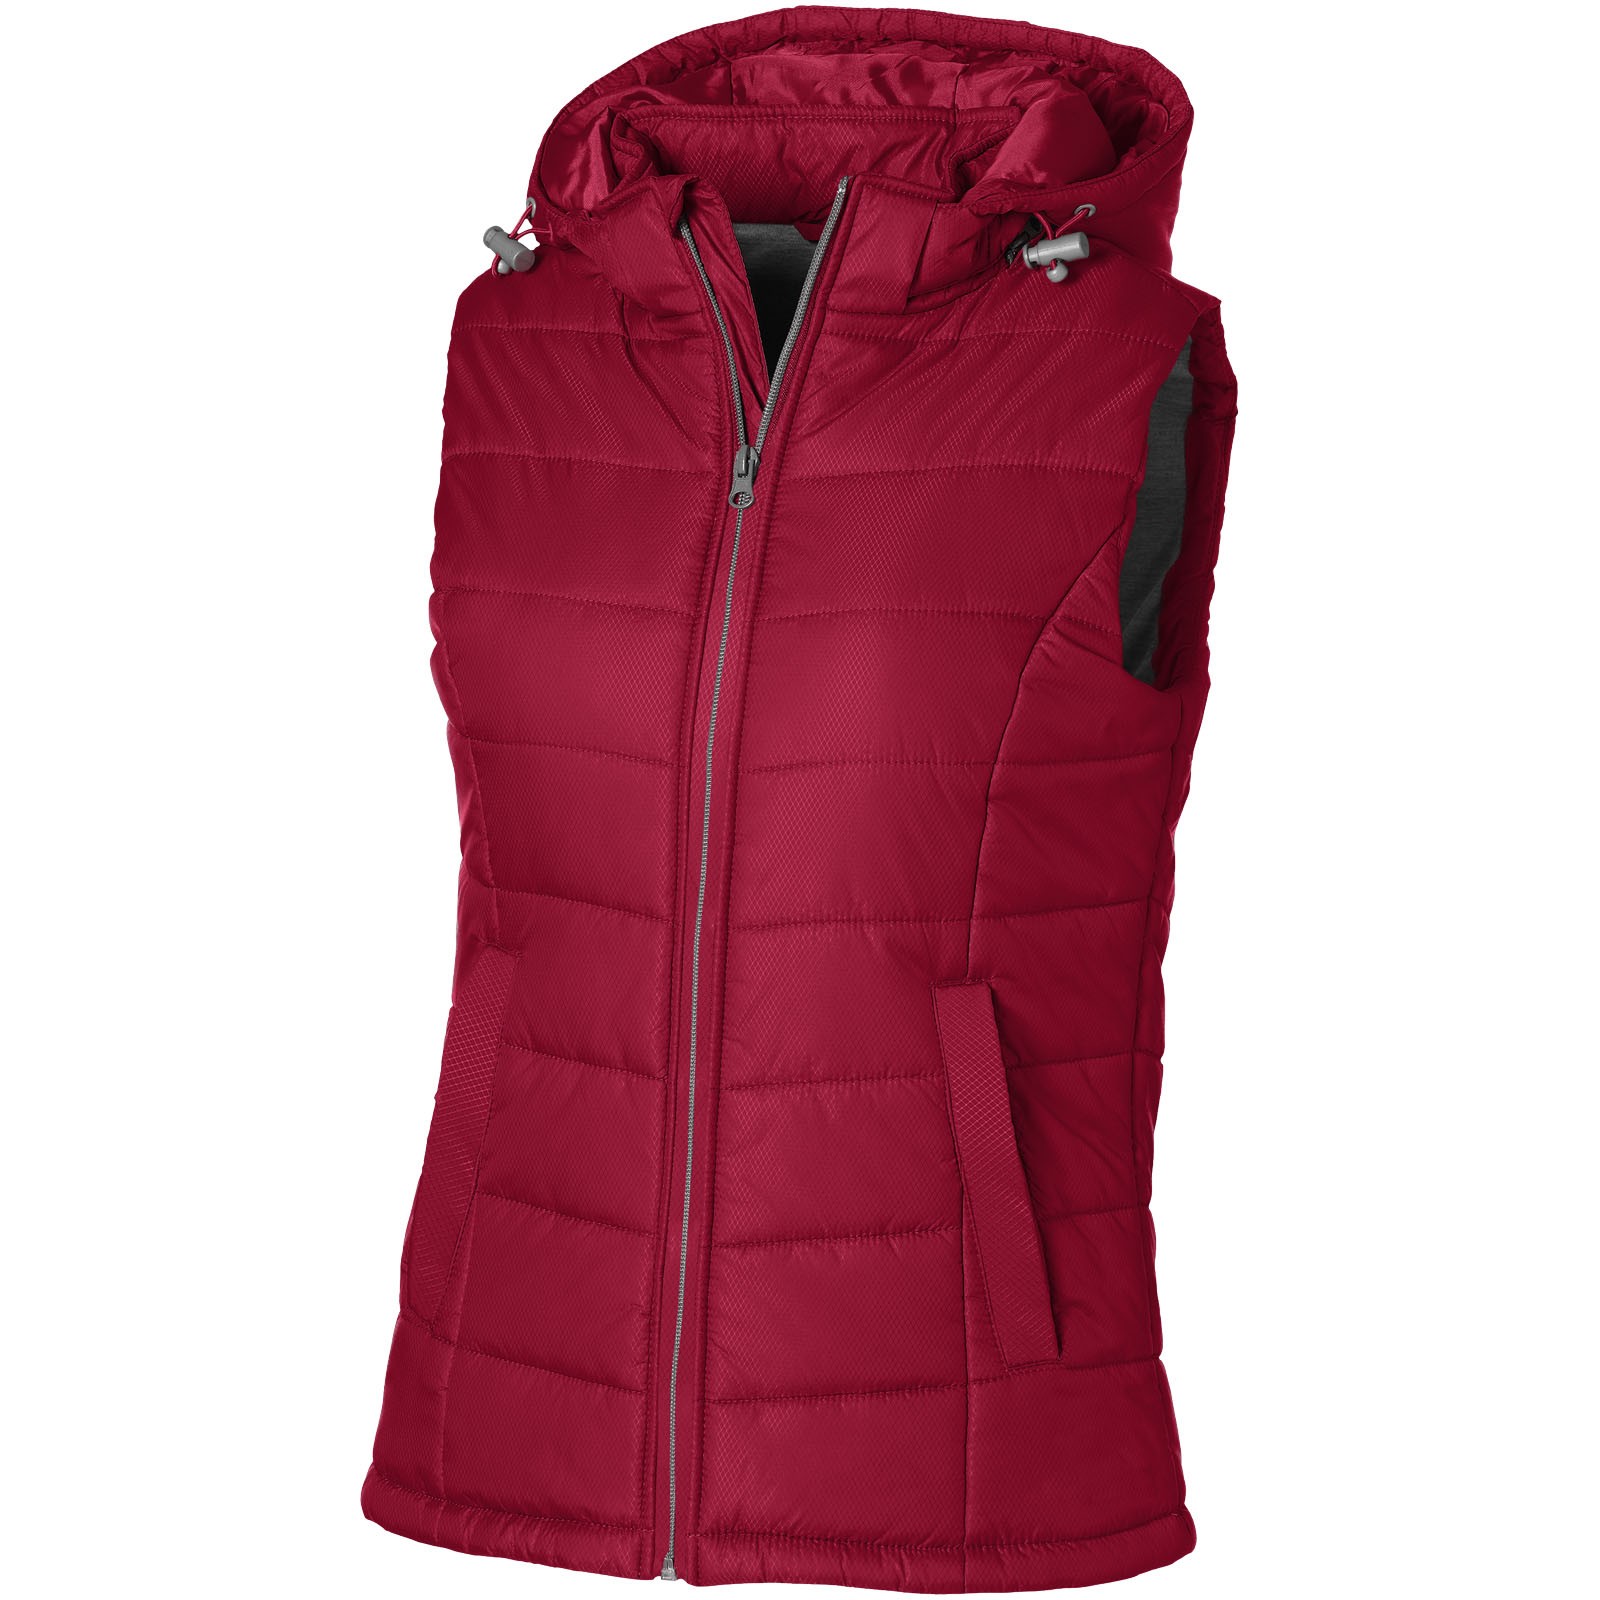 Mixed Doubles ladies bodywarmer - Red / XL